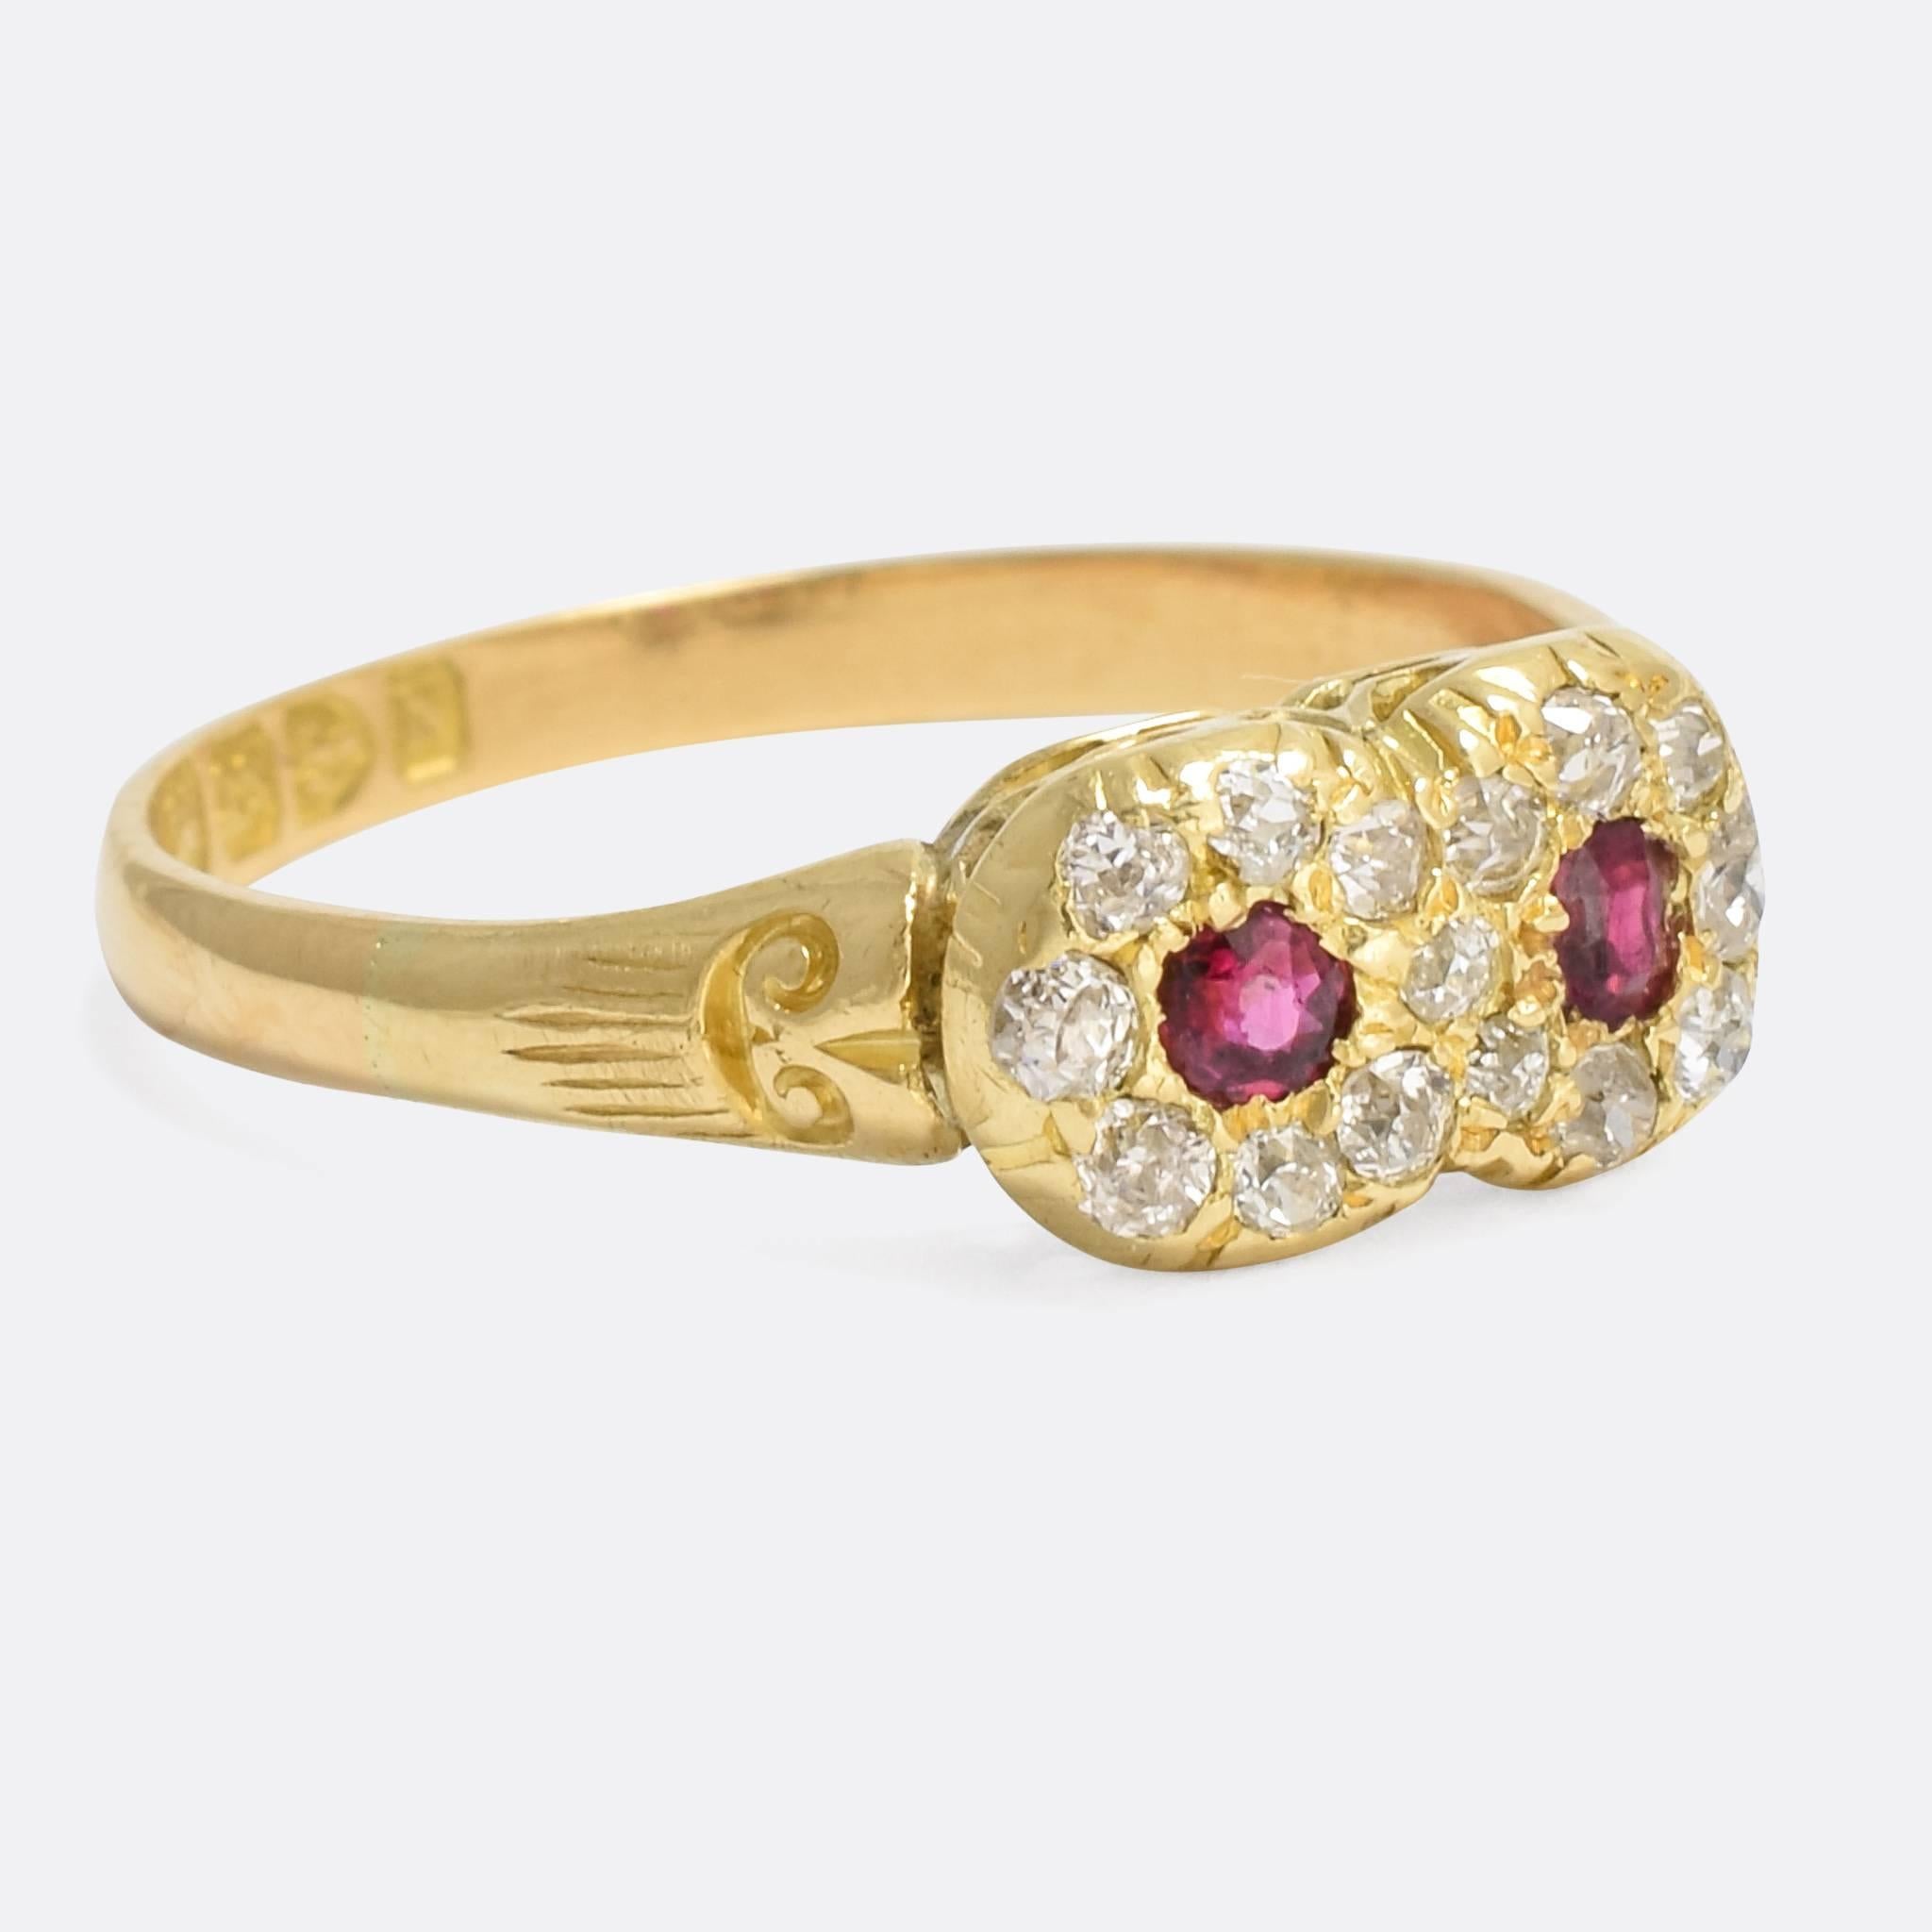 An adorable antique double cluster ring, set with two natural rubies and old cut diamonds. The two clusters are overlapped, a sweet toi et moi sentiment, and the shoulders feature deeply chased scrolled detailing. Clear English hallmarks indicate